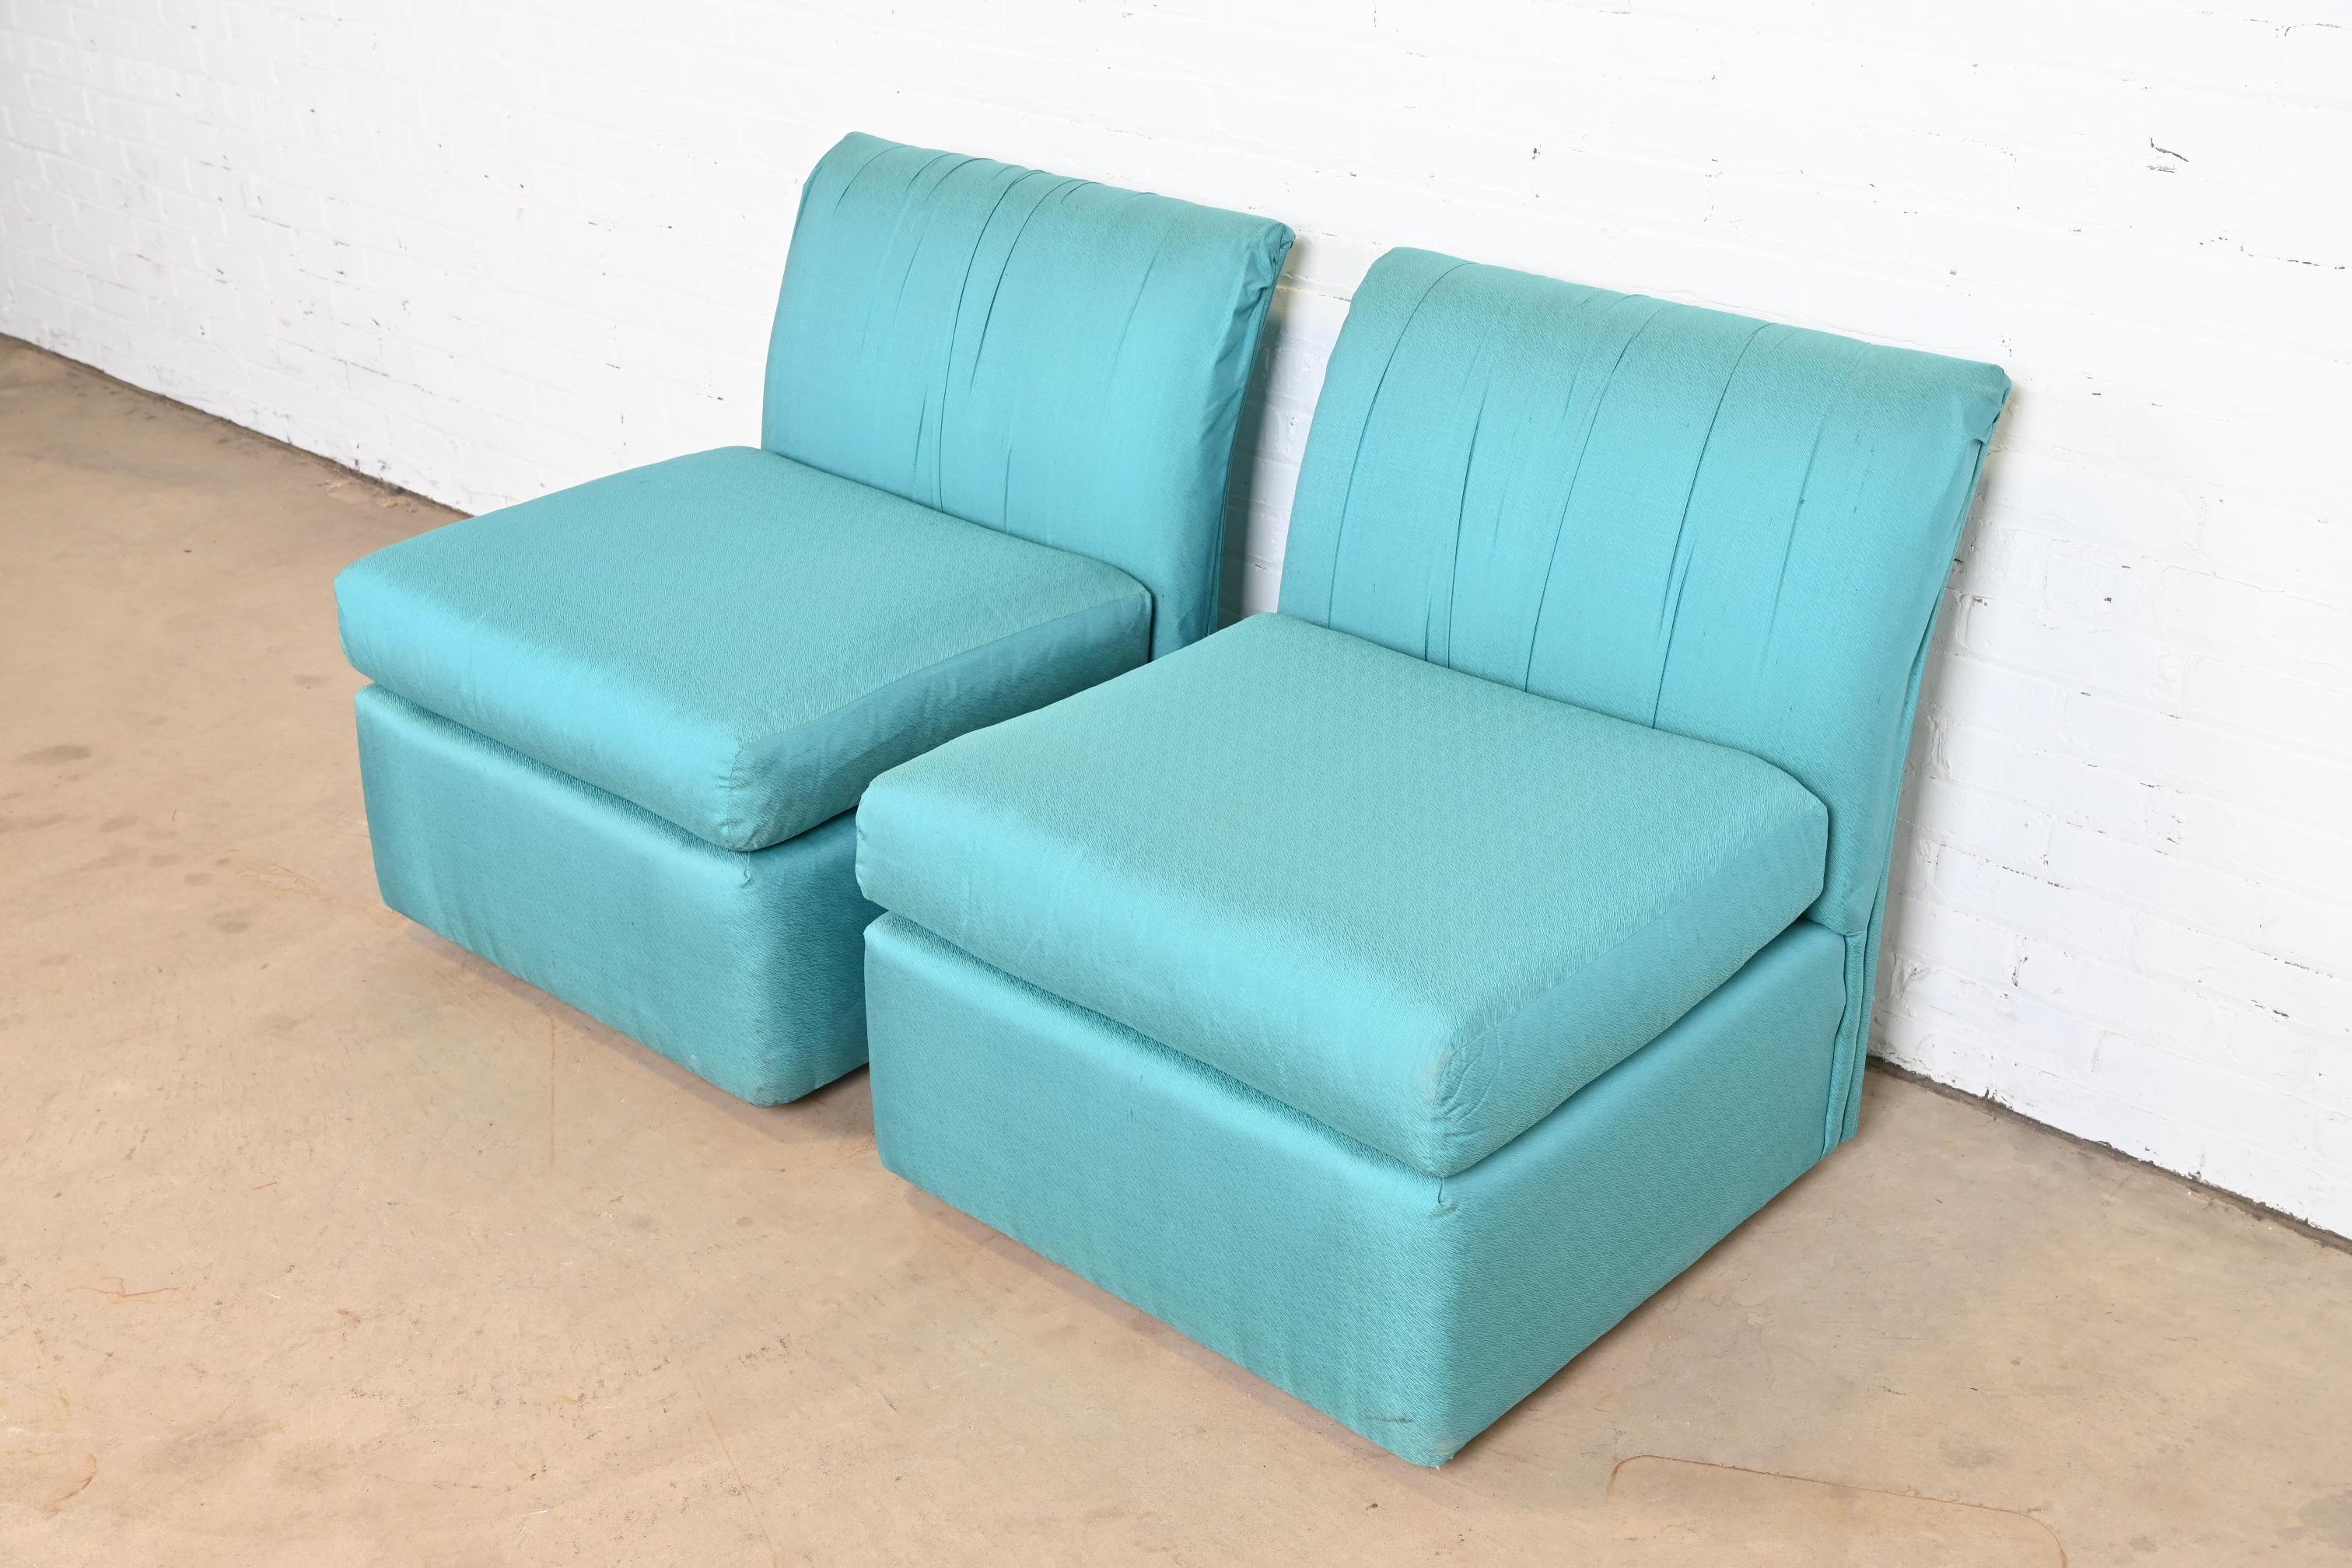 Baker Furniture Modern Silk Upholstered Slipper Chairs or Lounge Chairs, Pair In Good Condition For Sale In South Bend, IN